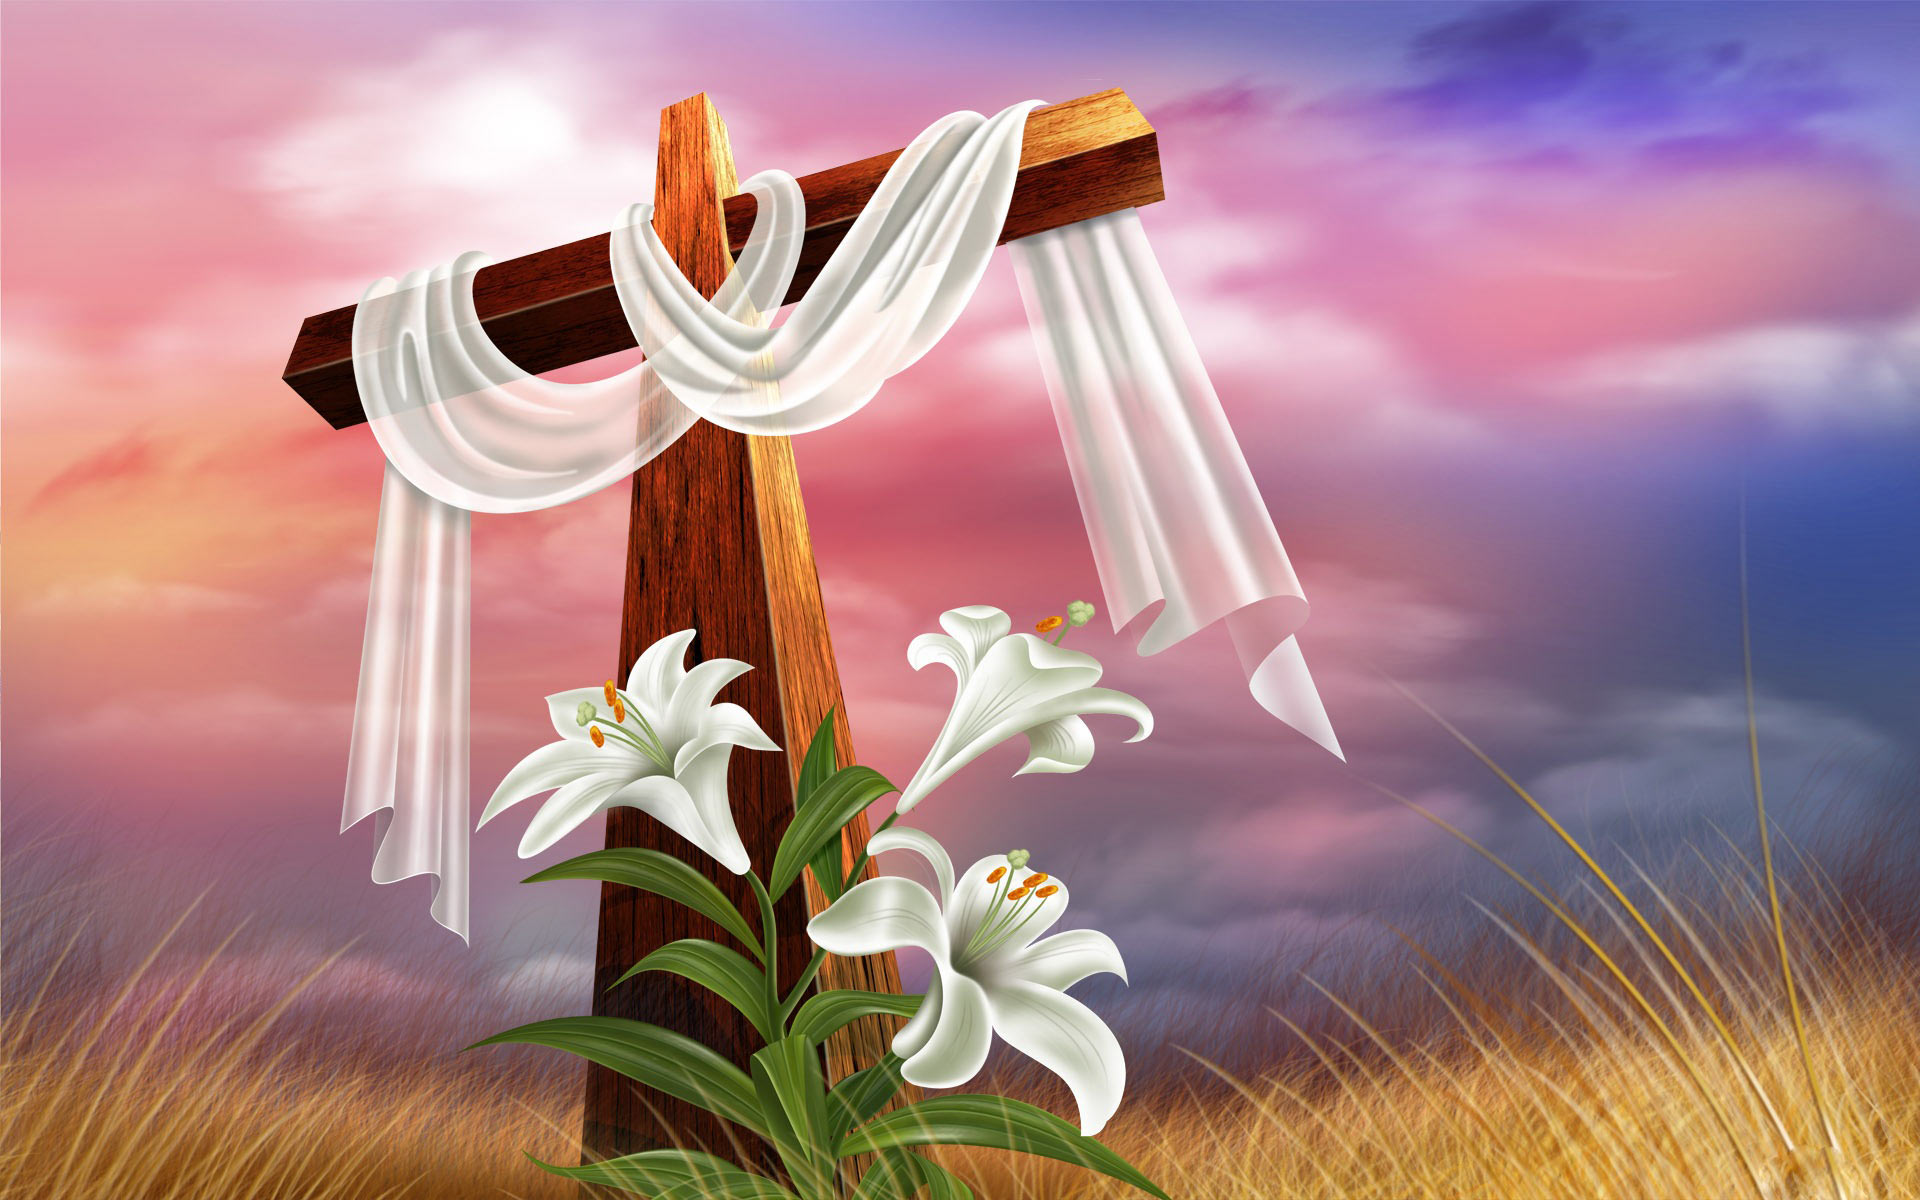  on August 28 2015 By admin Comments Off on Christian Cross Wallpapers